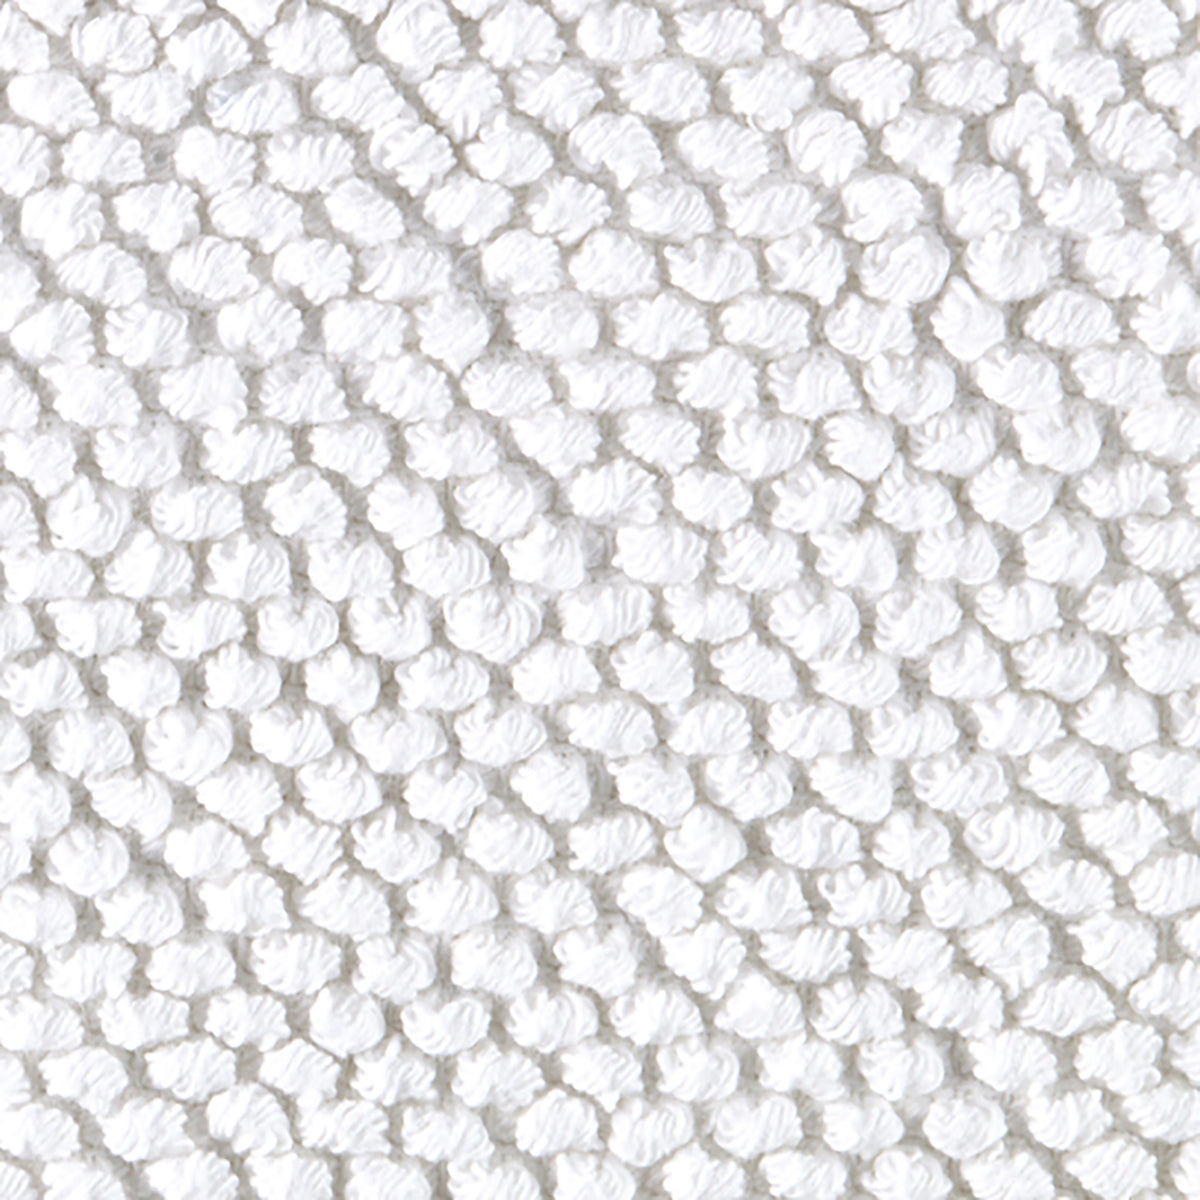 Swatch Sample of Matouk Reverie Bath Rugs in Color White